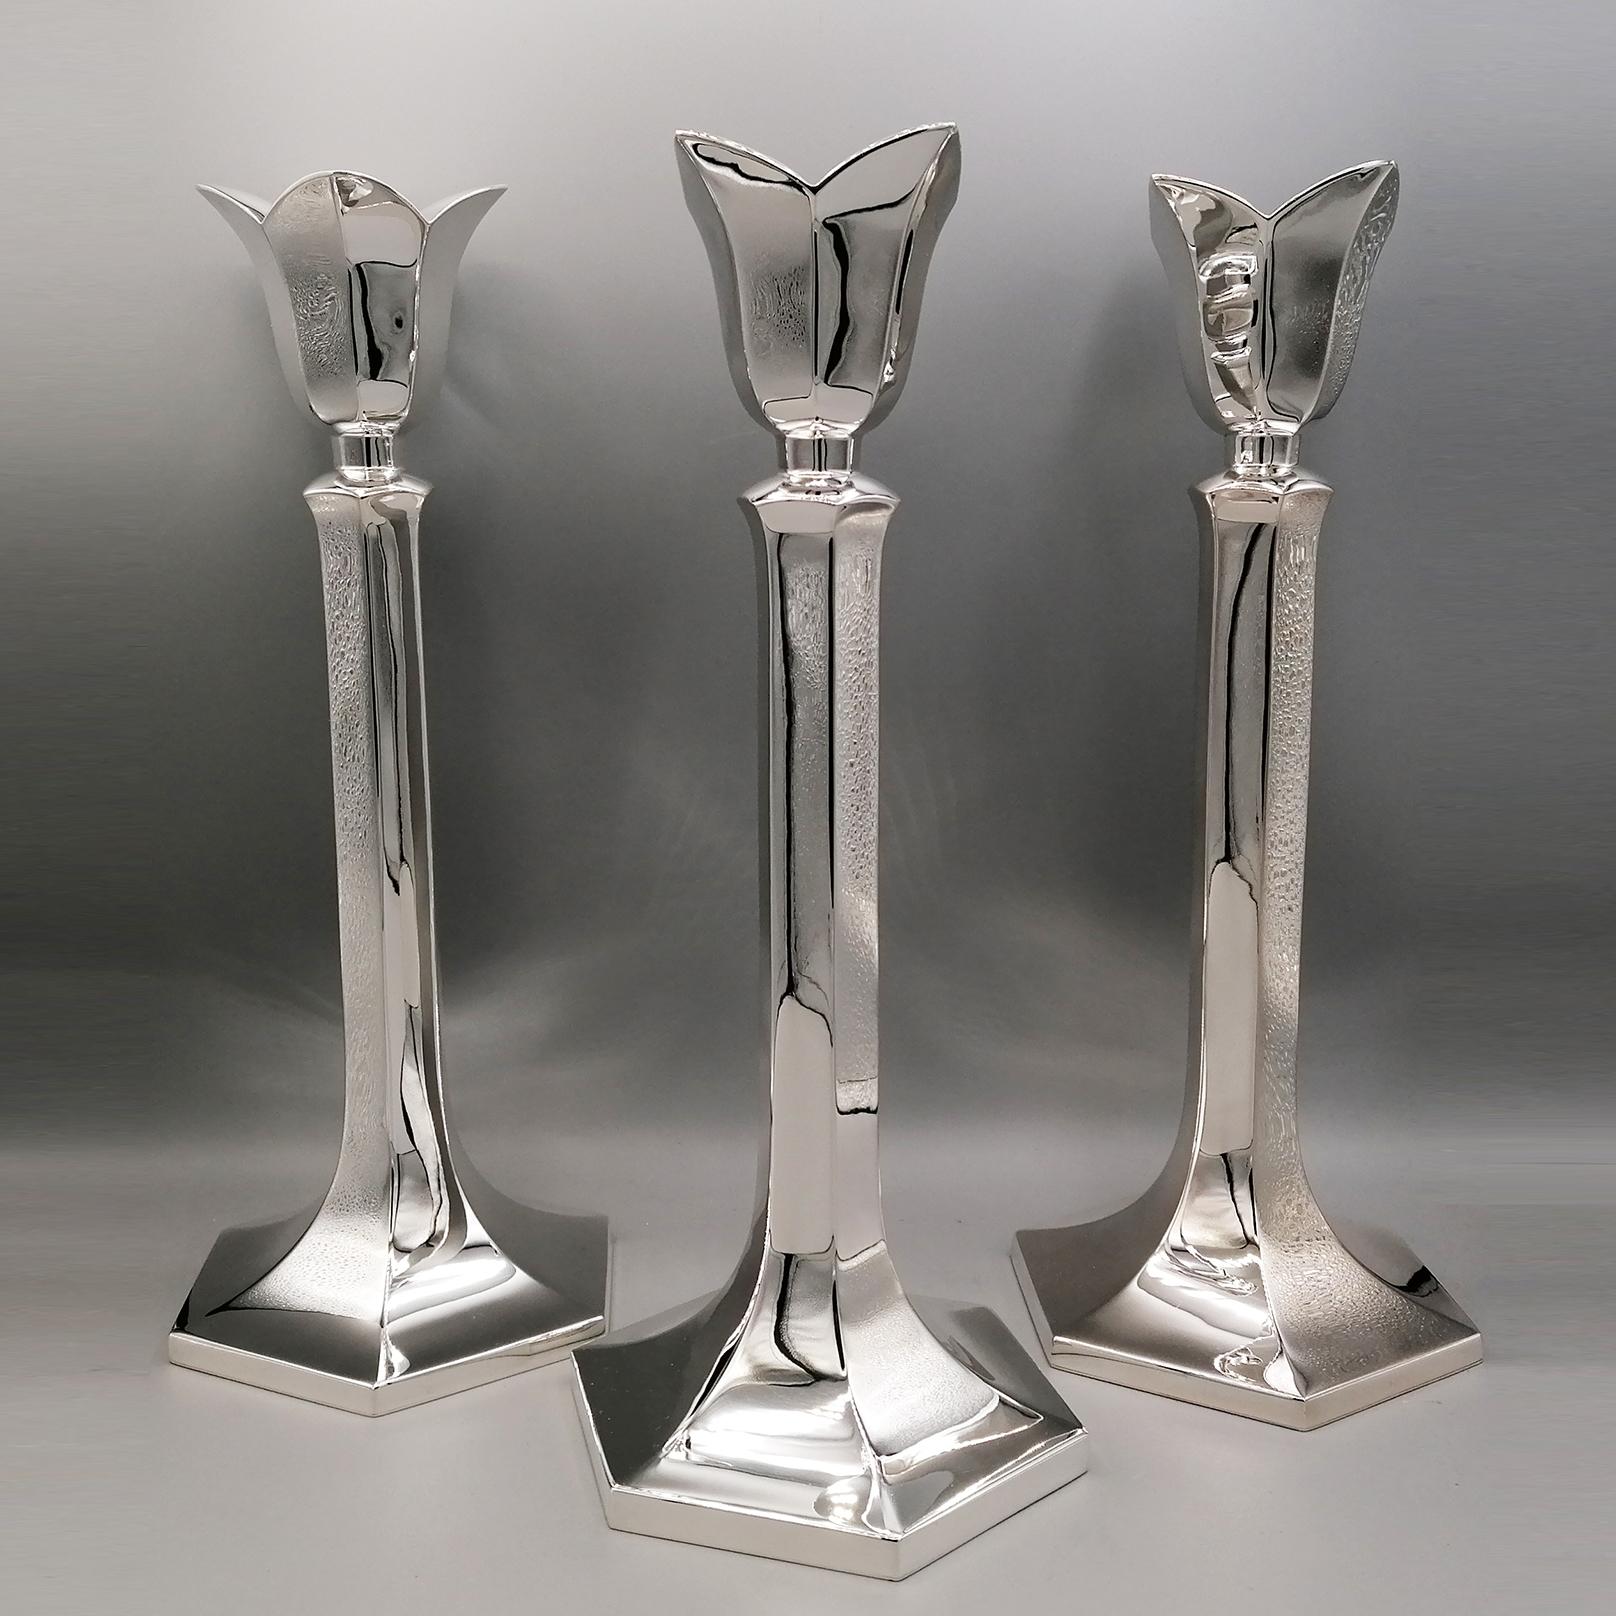 Fully handmade Trio of candlesticks in solid 800 silver.
The candlesticks have been completely handcrafted from silver plate to give them a hexagonal shape.
The base is wide and imposing to give them more stability, they rise slightly towards the